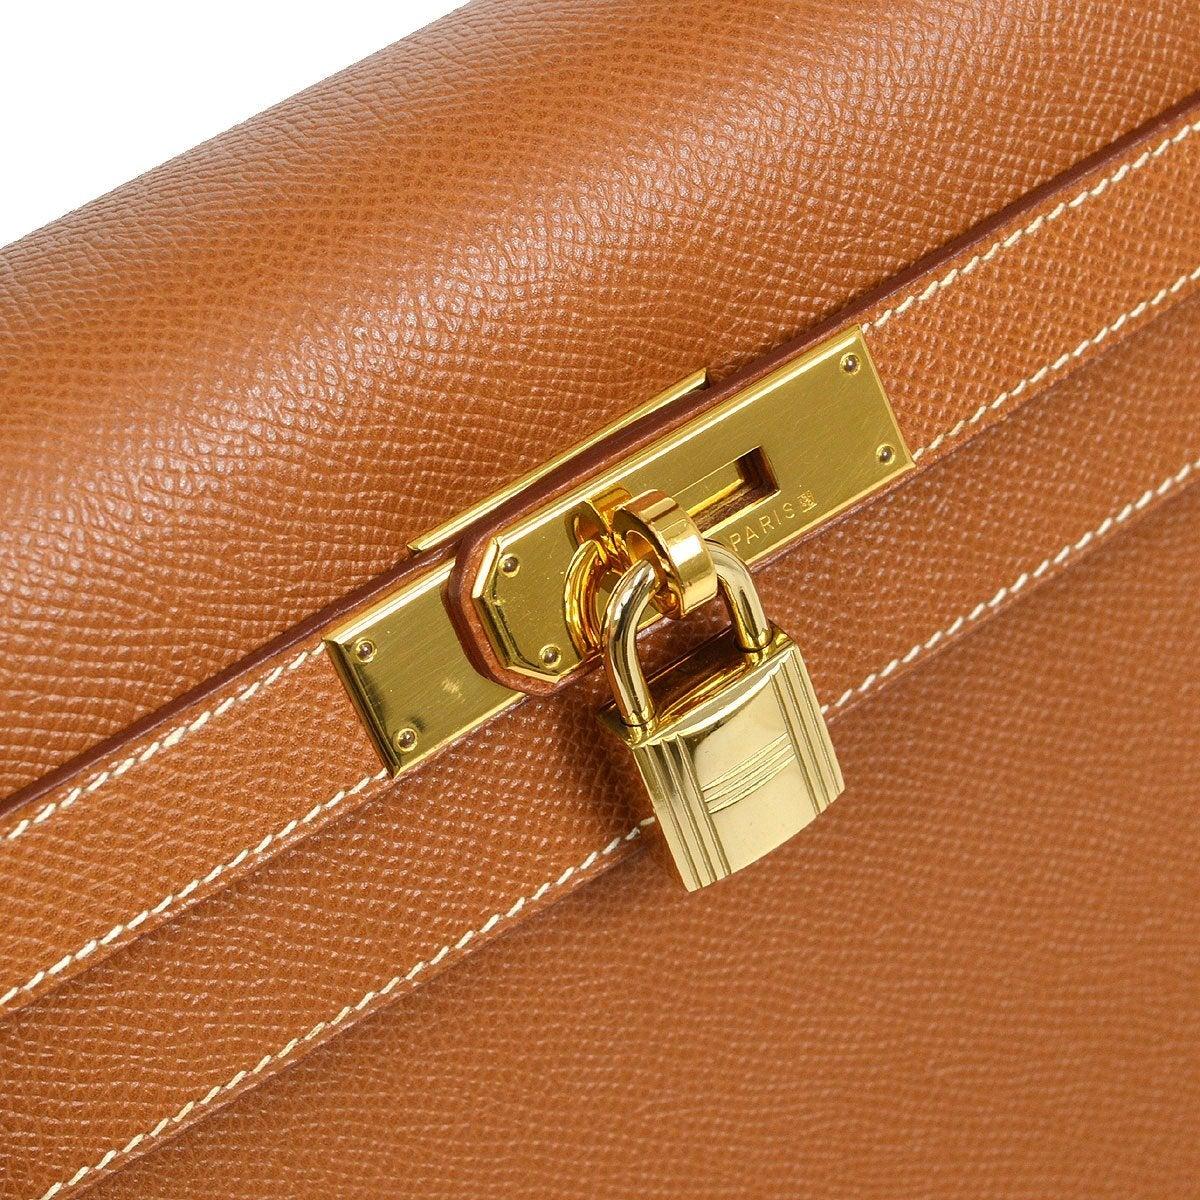 Pre-Owned Vintage Condition
From 1996 Collection
Veau Greine Courchevel Leather
Gold Tone Hardware
Leather Lining
Measures 13